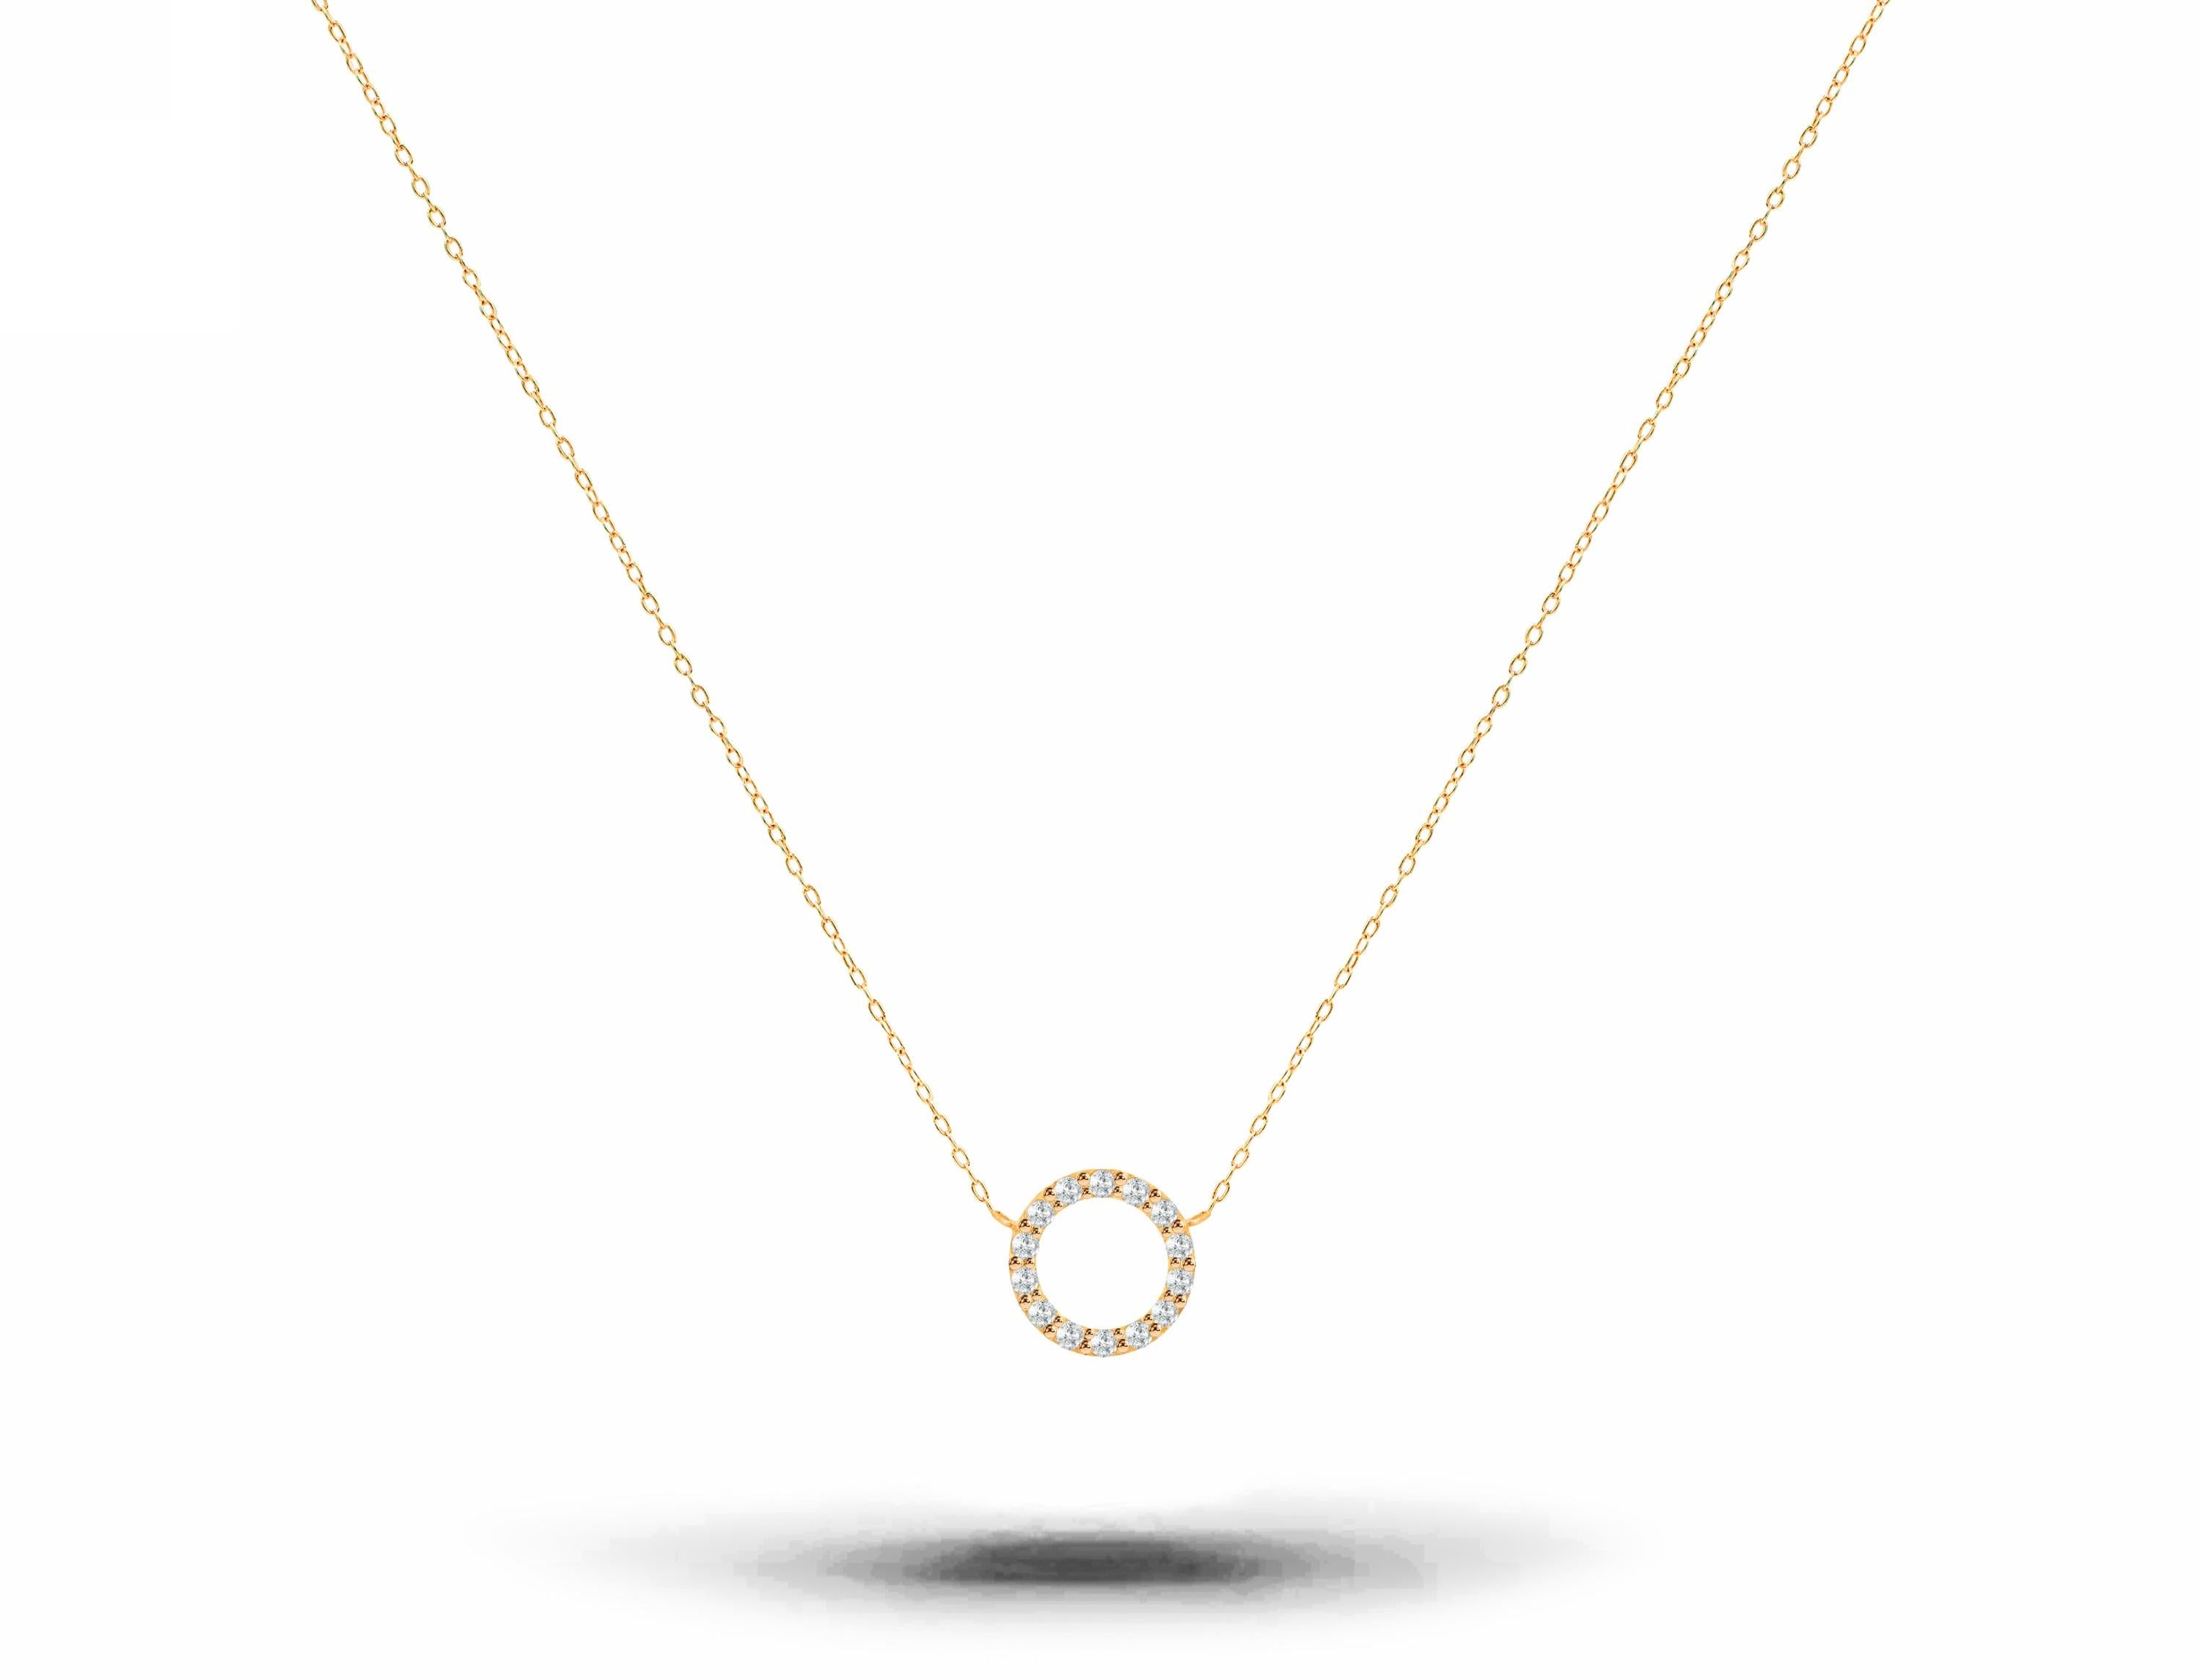 Diamond Circle Necklace is made of 14k solid gold available in three colors of gold: White Gold / Rose Gold / Yellow Gold.

Natural genuine round cut diamond each diamond is hand selected by me to ensure quality and set by a master setter in our